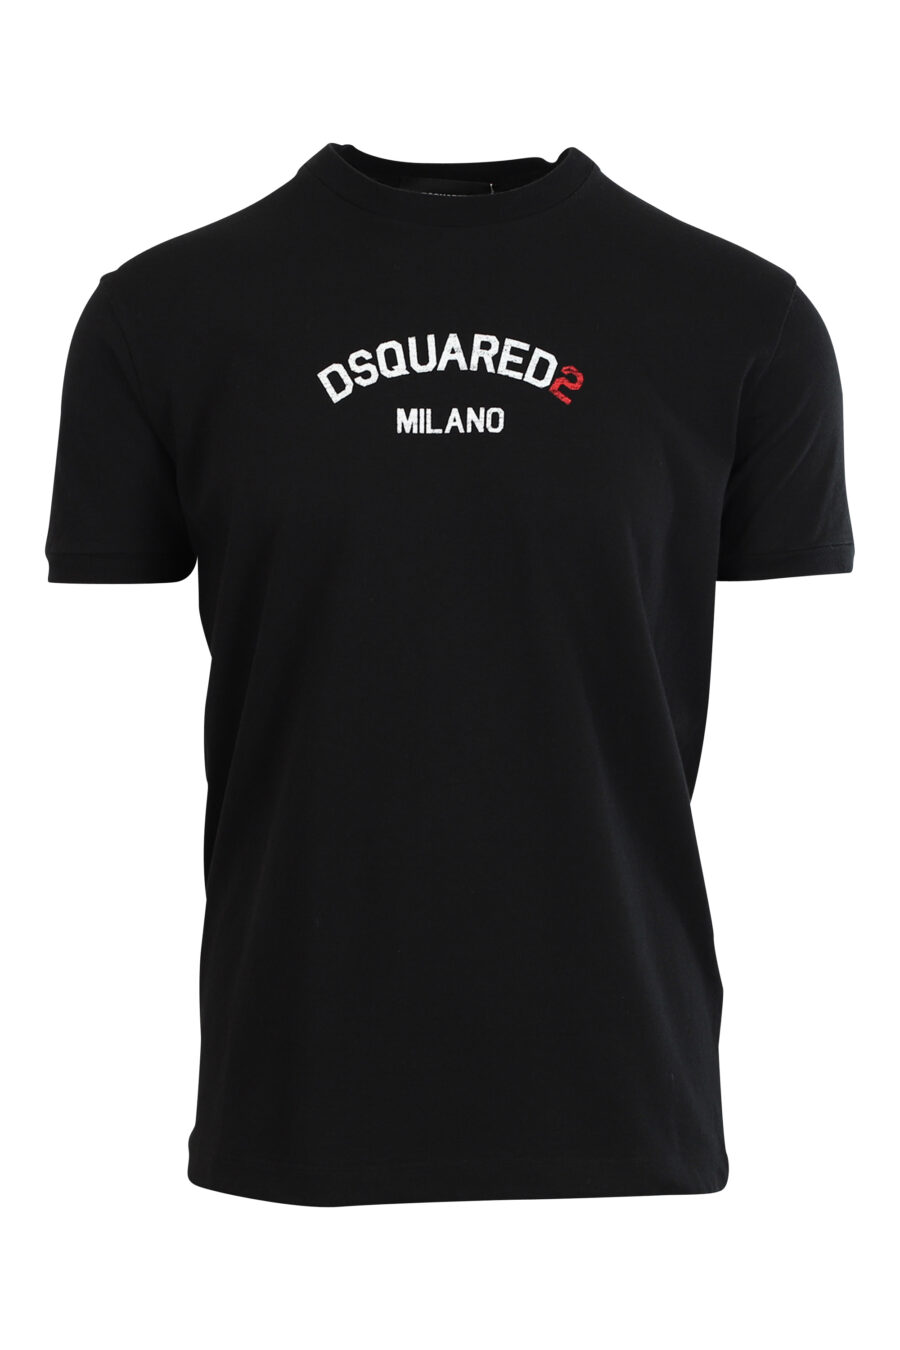 Black T-shirt with minilogue "dsquared2 milano" - 8058049836090